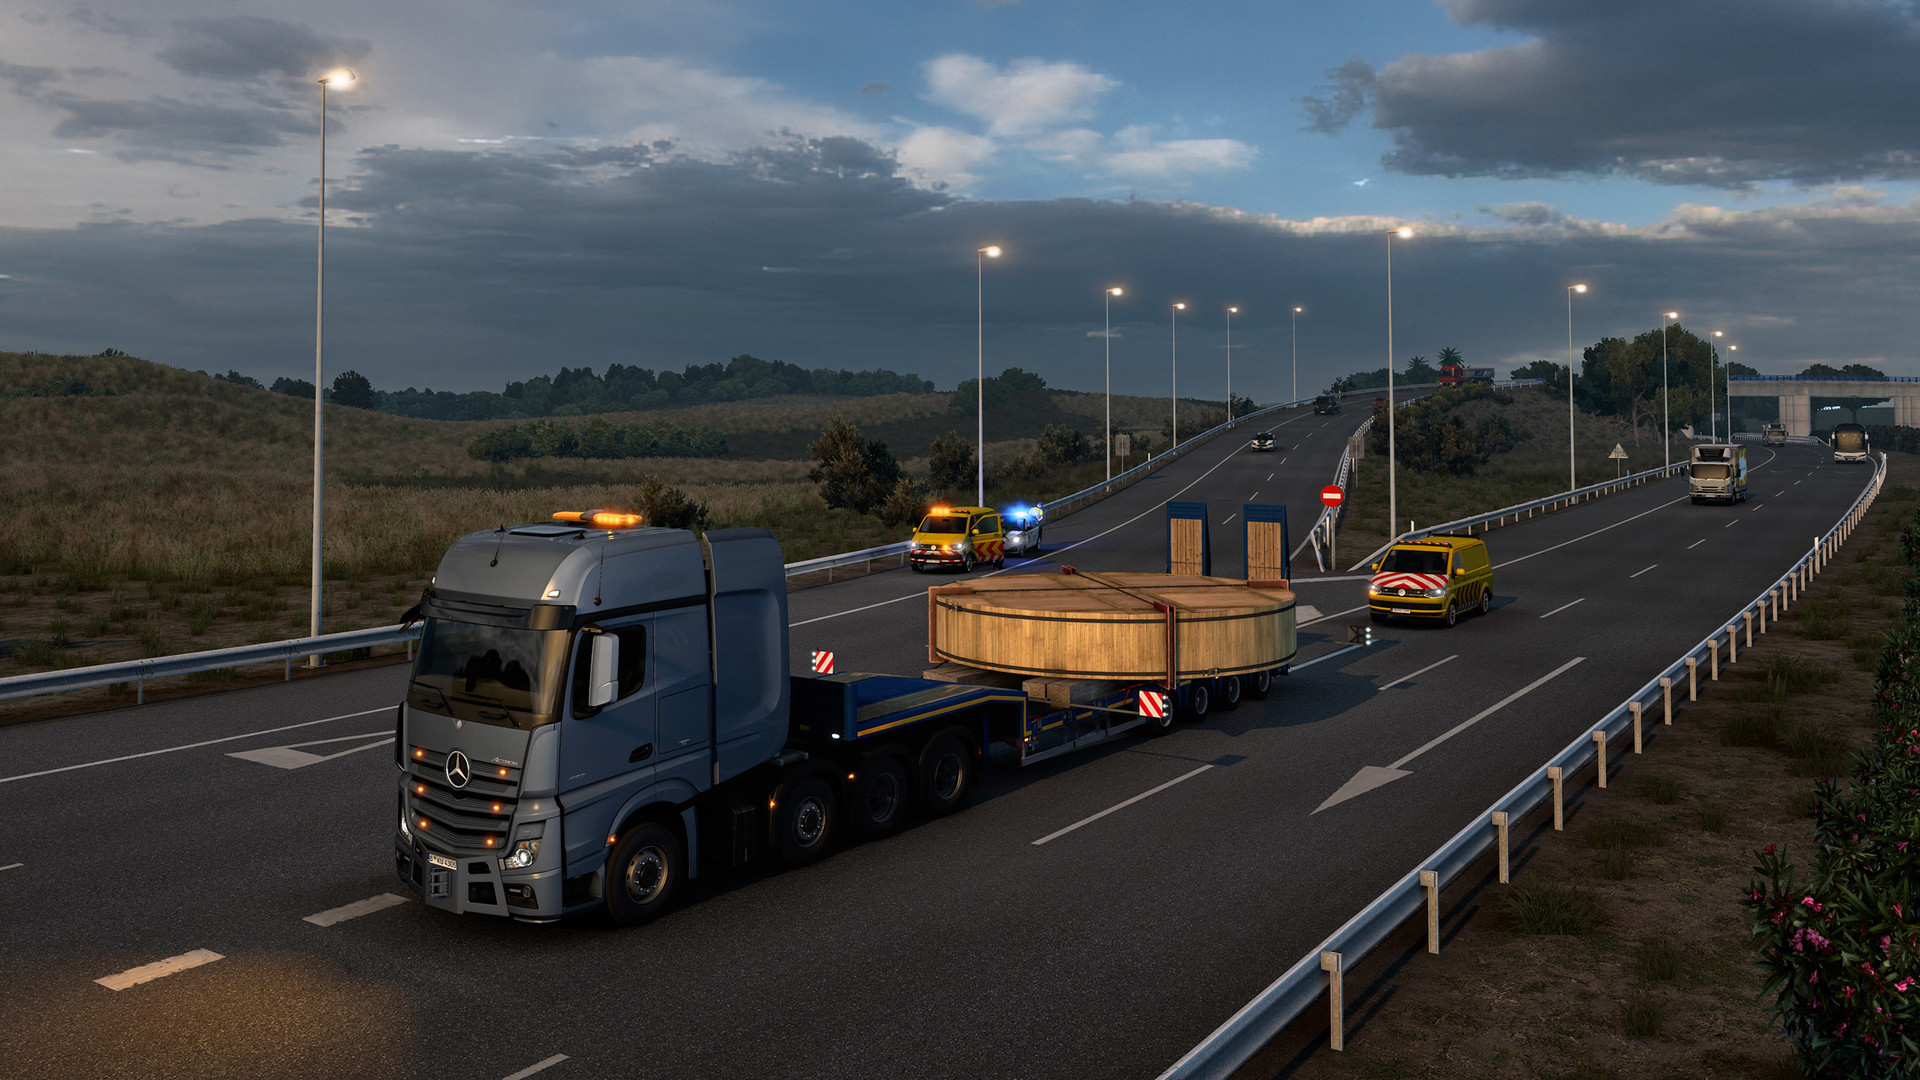 Save 66% on Euro Truck Simulator 2 - Beyond the Baltic Sea on Steam